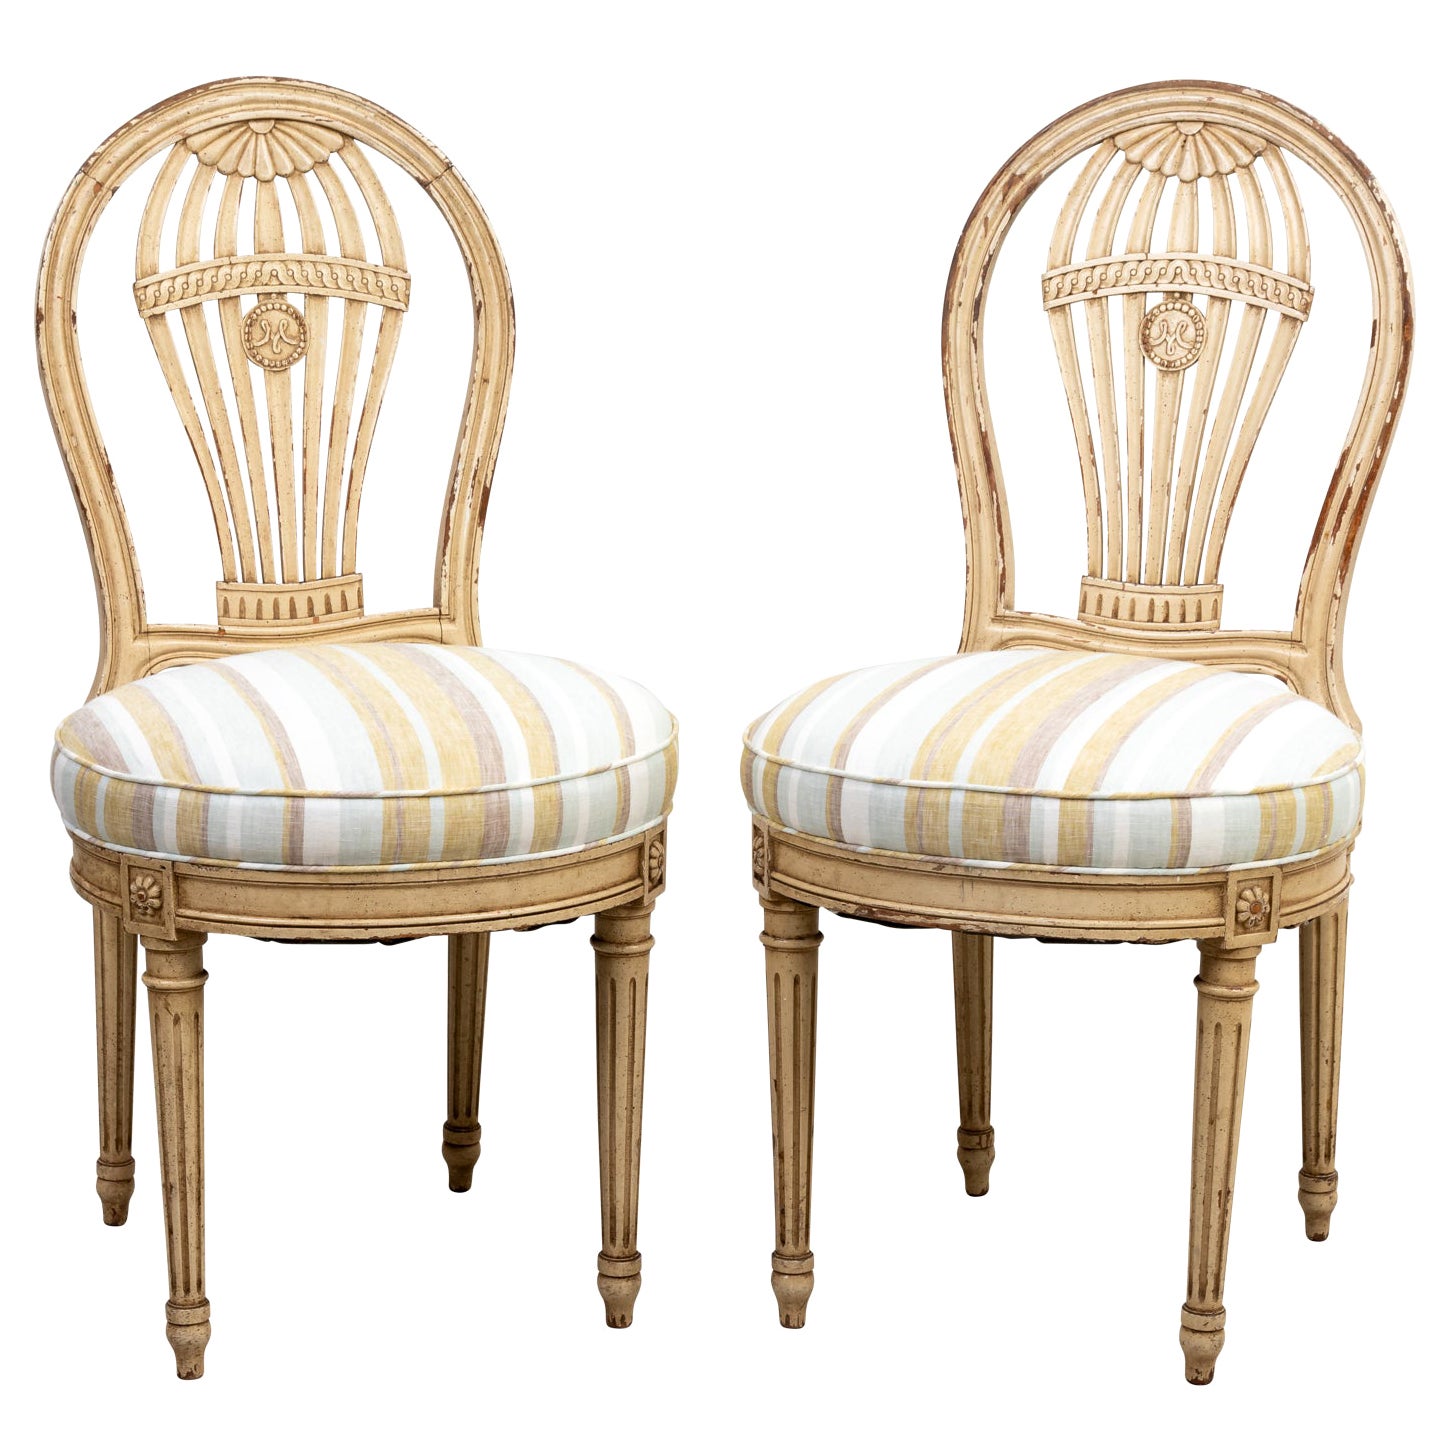 Pair of French Balloon Back Side Chairs